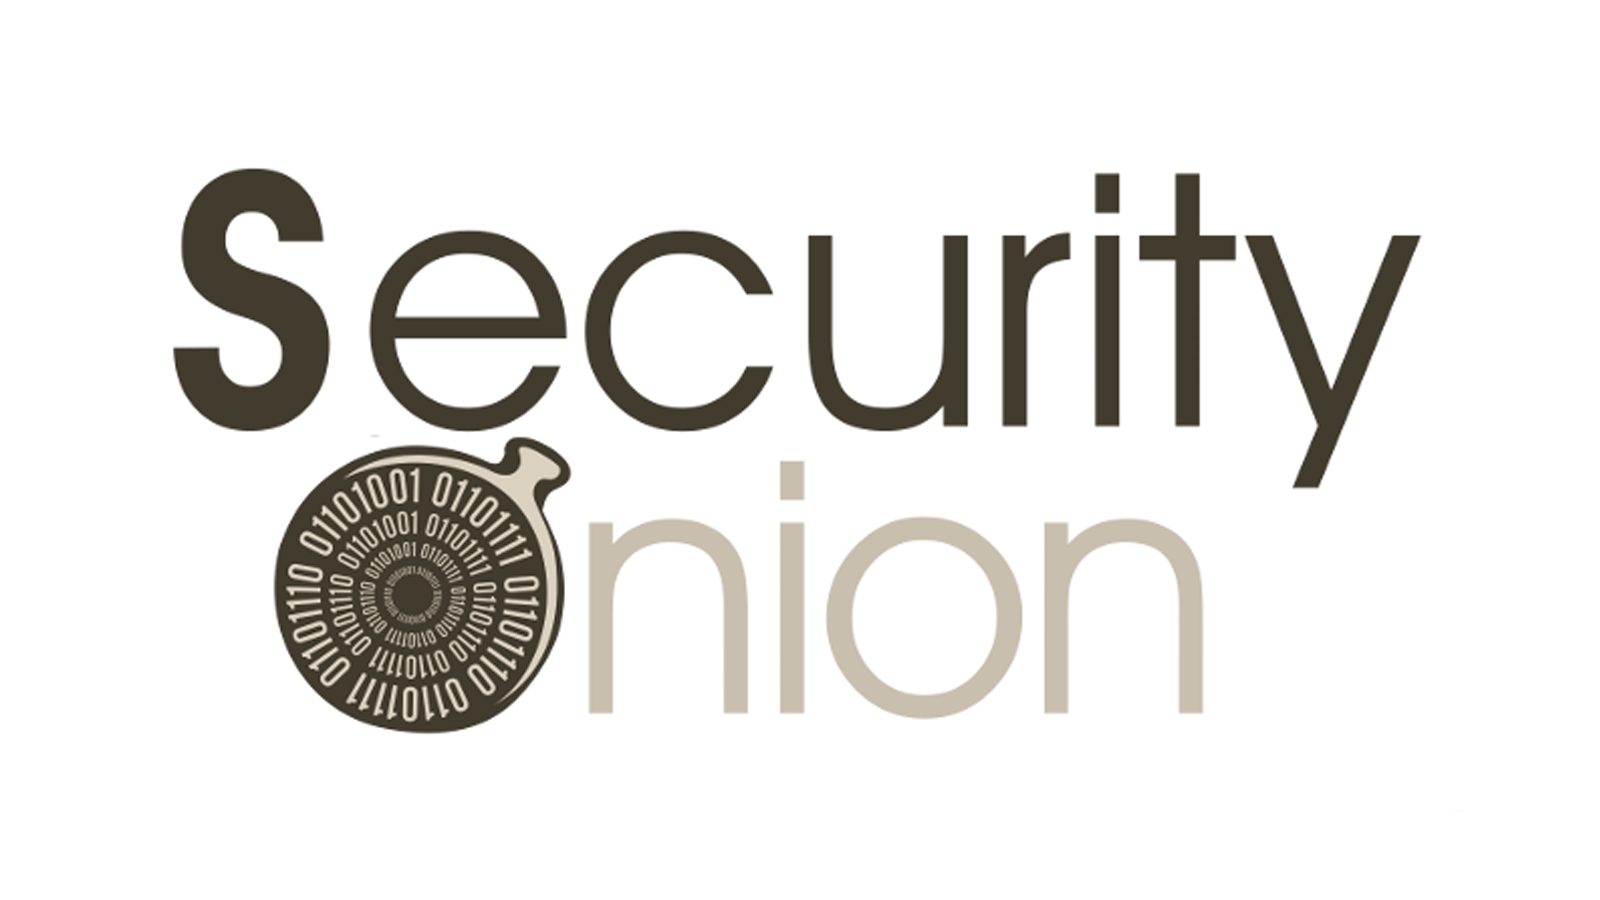 What Is The Host-Based Intrusion Detection Tool Integrated Into Security Onion?